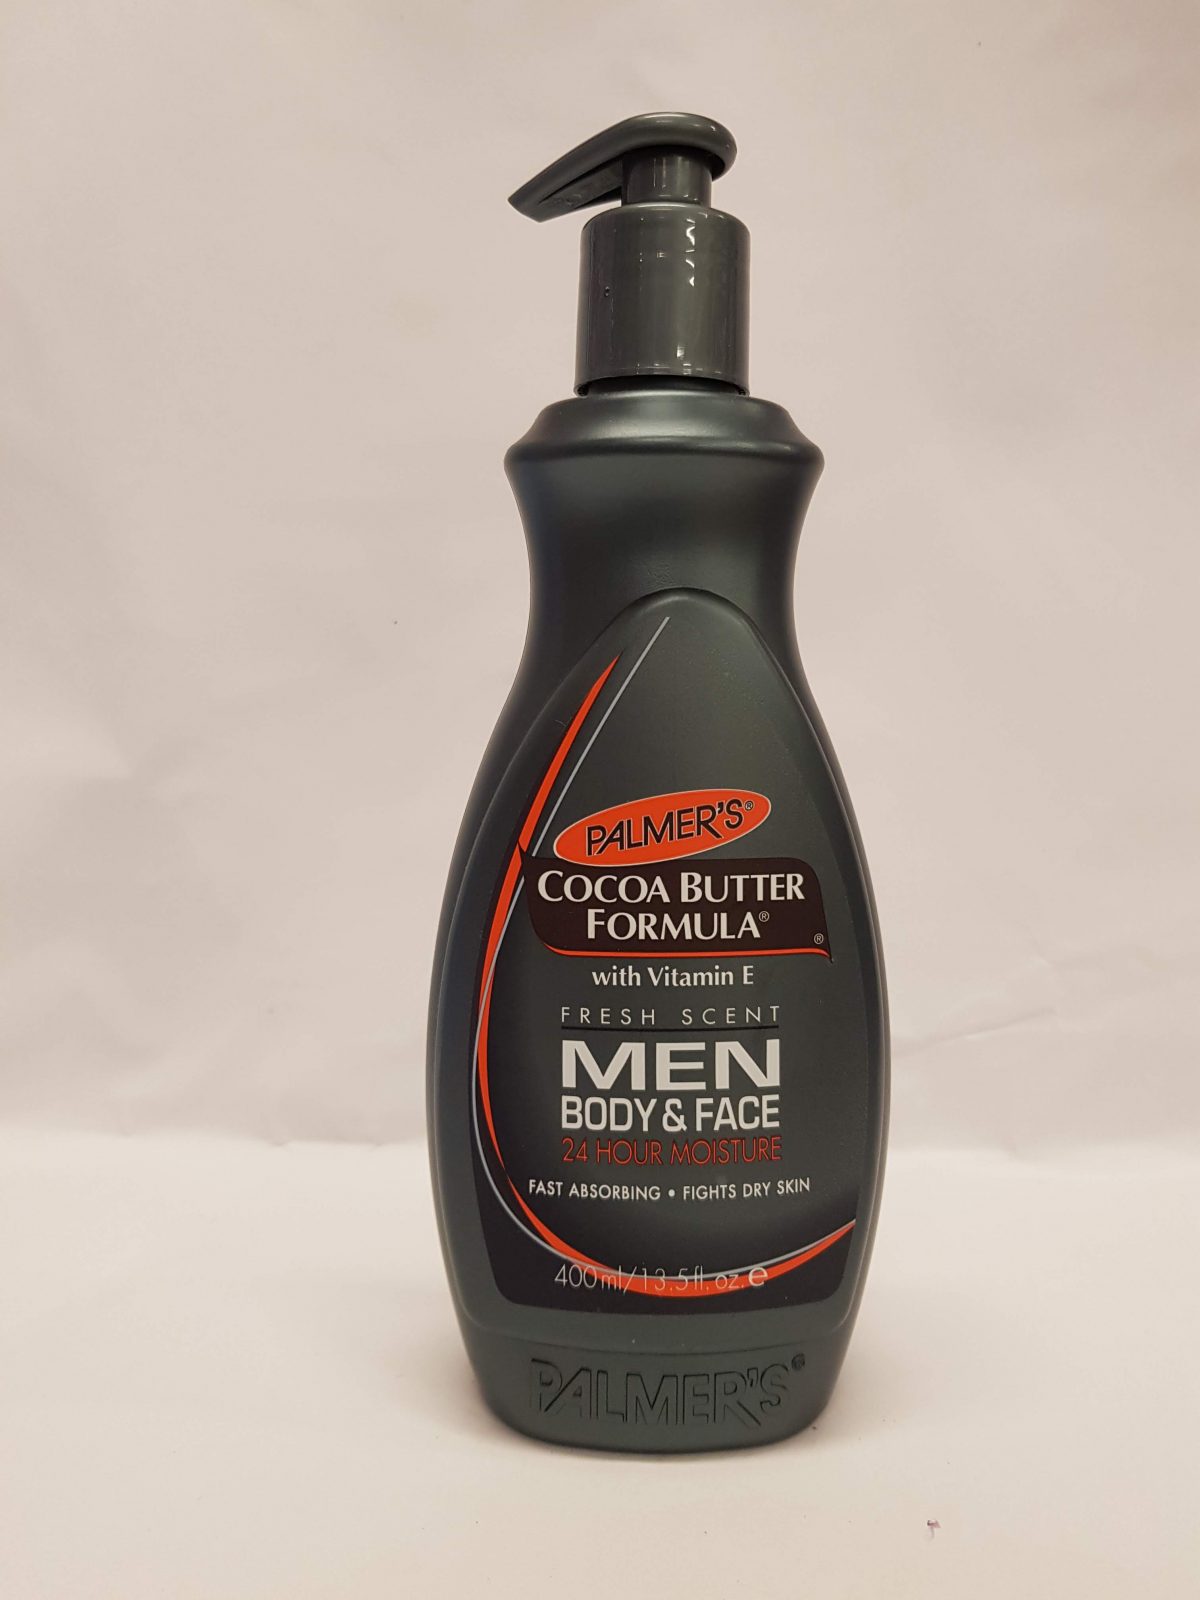 Palmer's Cocoa Butter Formula Men's Lotion 13.5 Fluid Ounce EachPalmer's cocoa butter formula for men contains pure cocoa butter and vitamin E to effectively combat rough, dry skin. It is fast absorbing, has a fresh scent and fights dry skin.